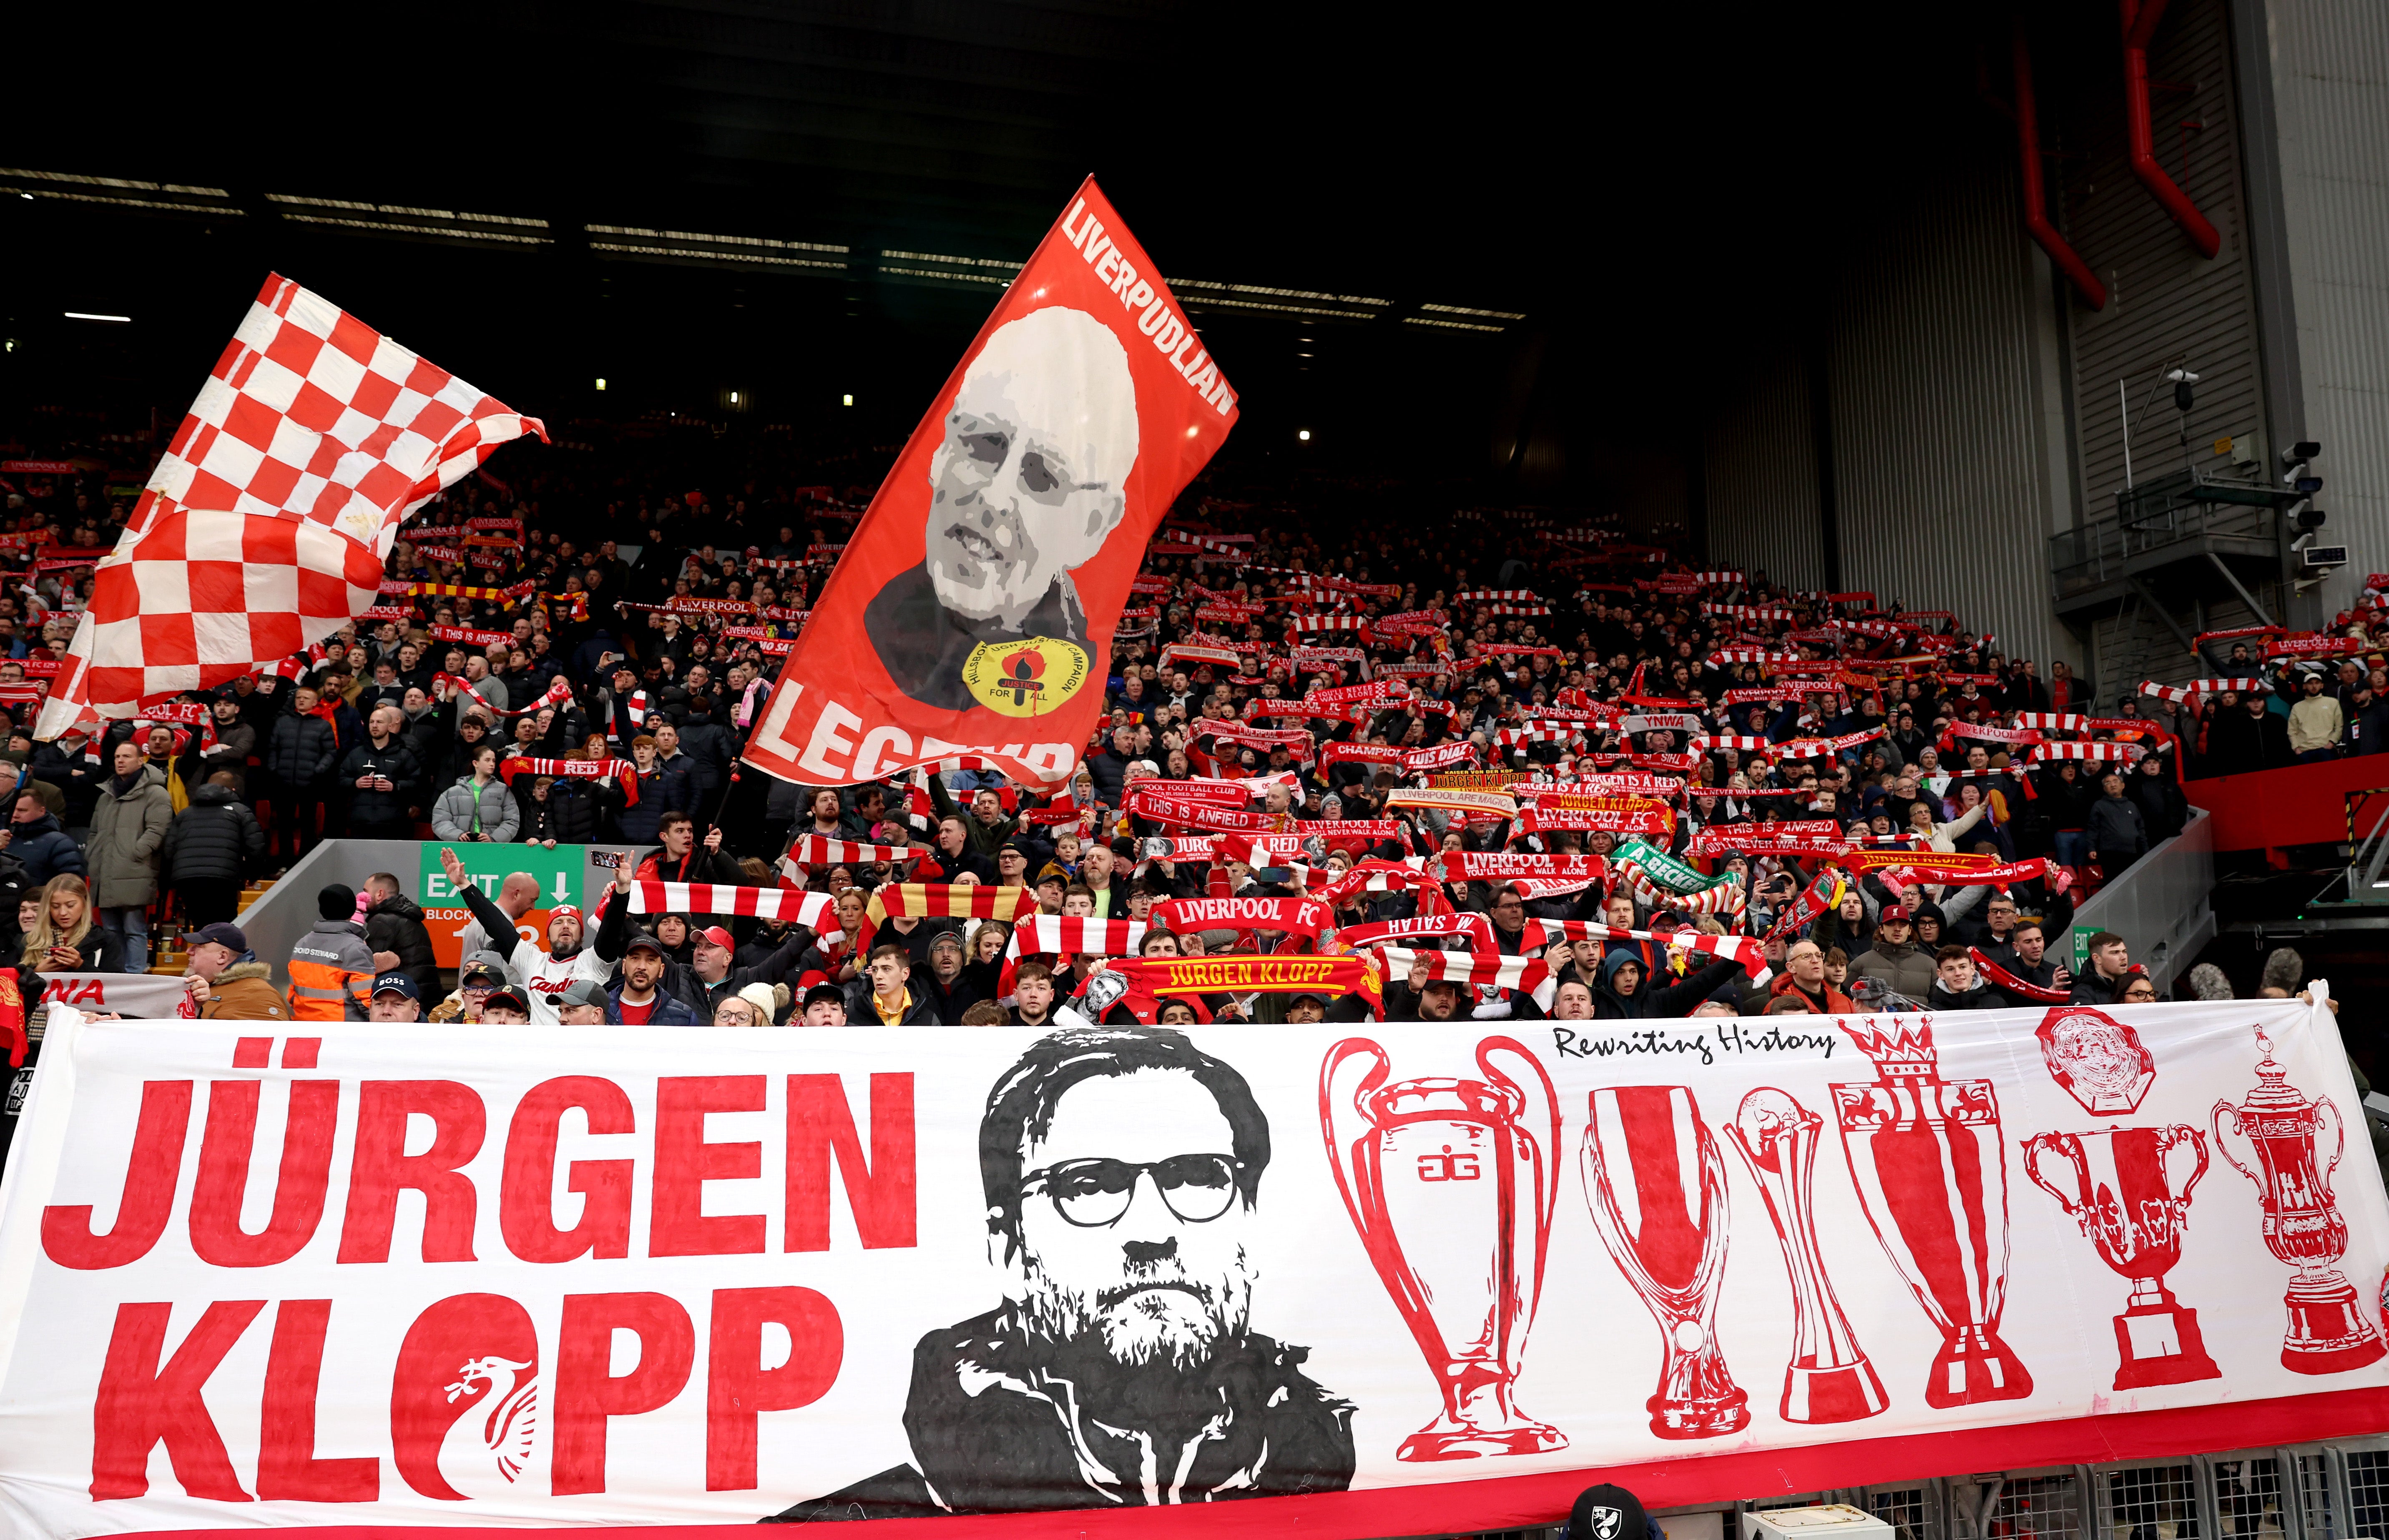 Anfield is set for an emotional end to the season as Liverpool target four trophies under Klopp